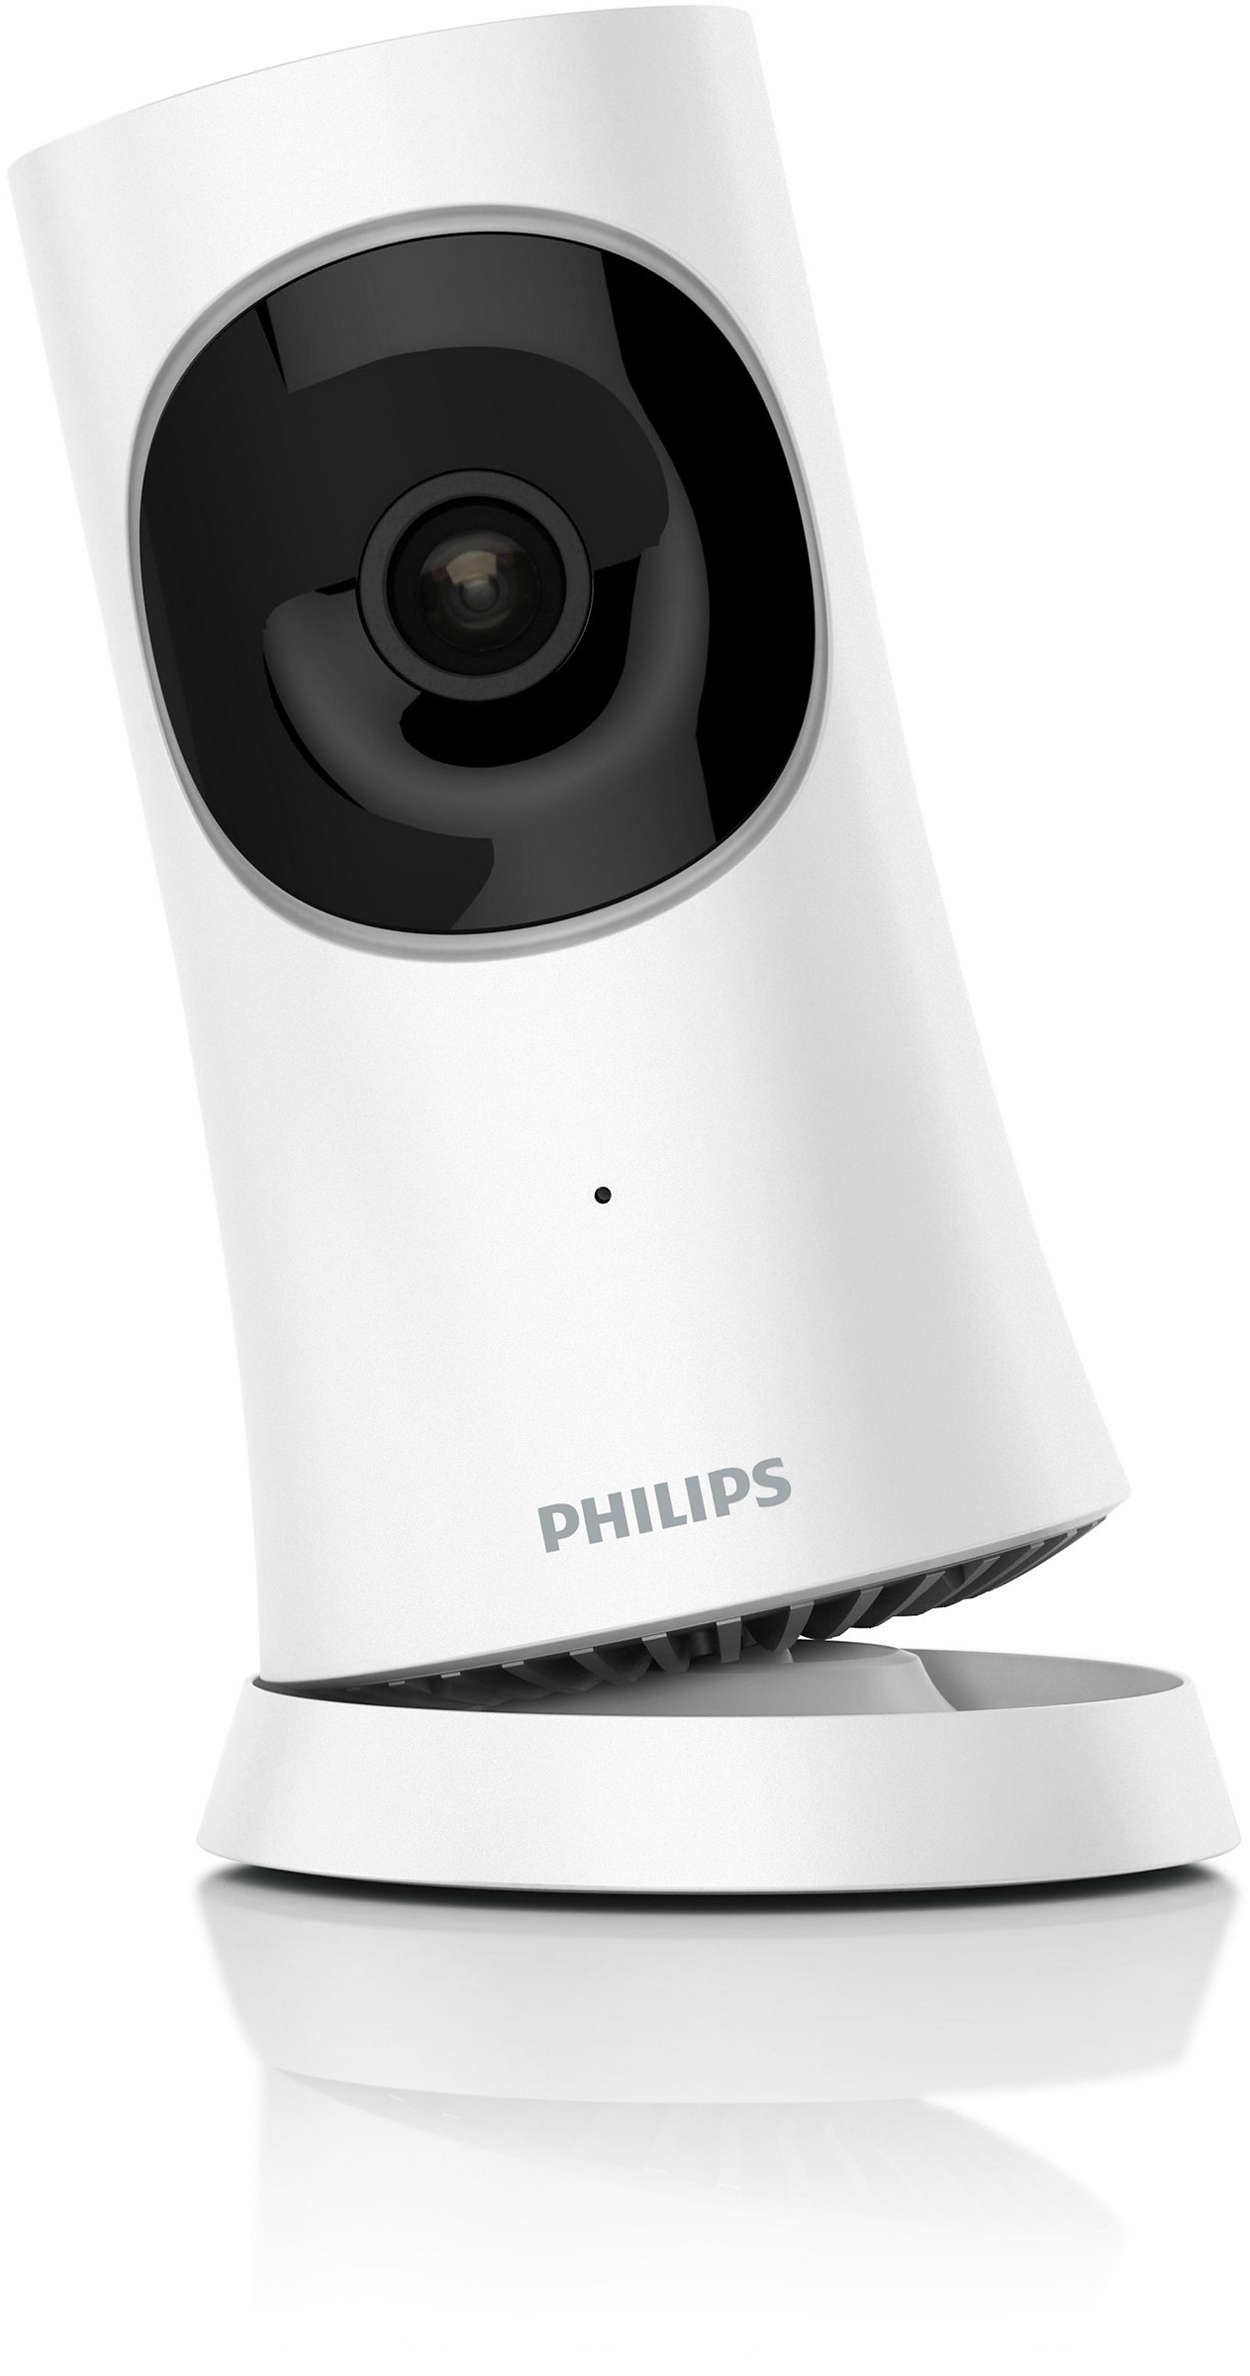 Philips Camsuite